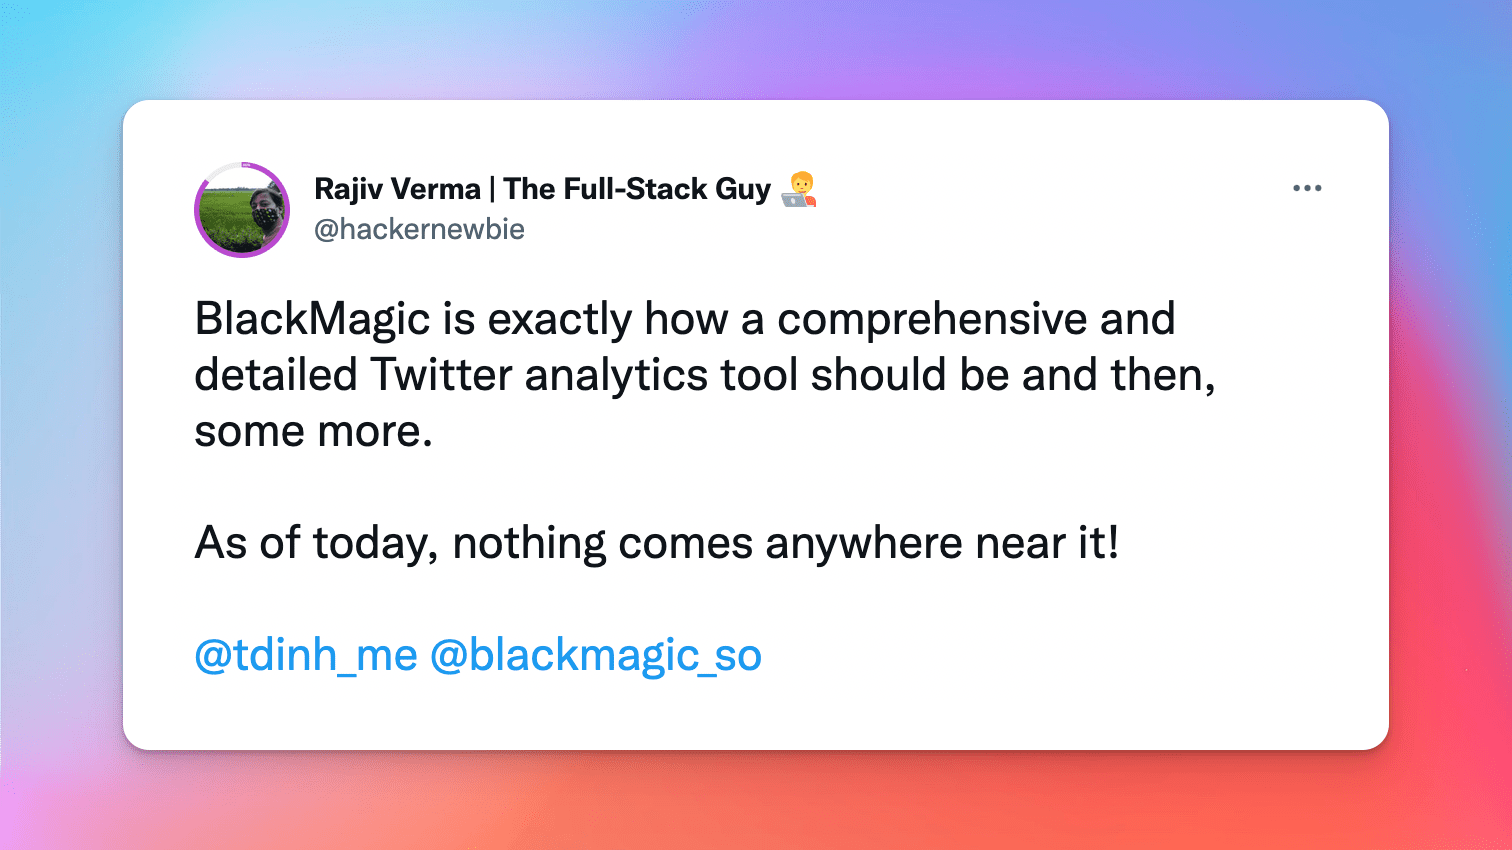 Testimonial on Twitter: BlackMagic is exactly how a comprehensive and detailed Twitter analytics tool should be and then, some more. As of today, nothing comes anywhere near it!